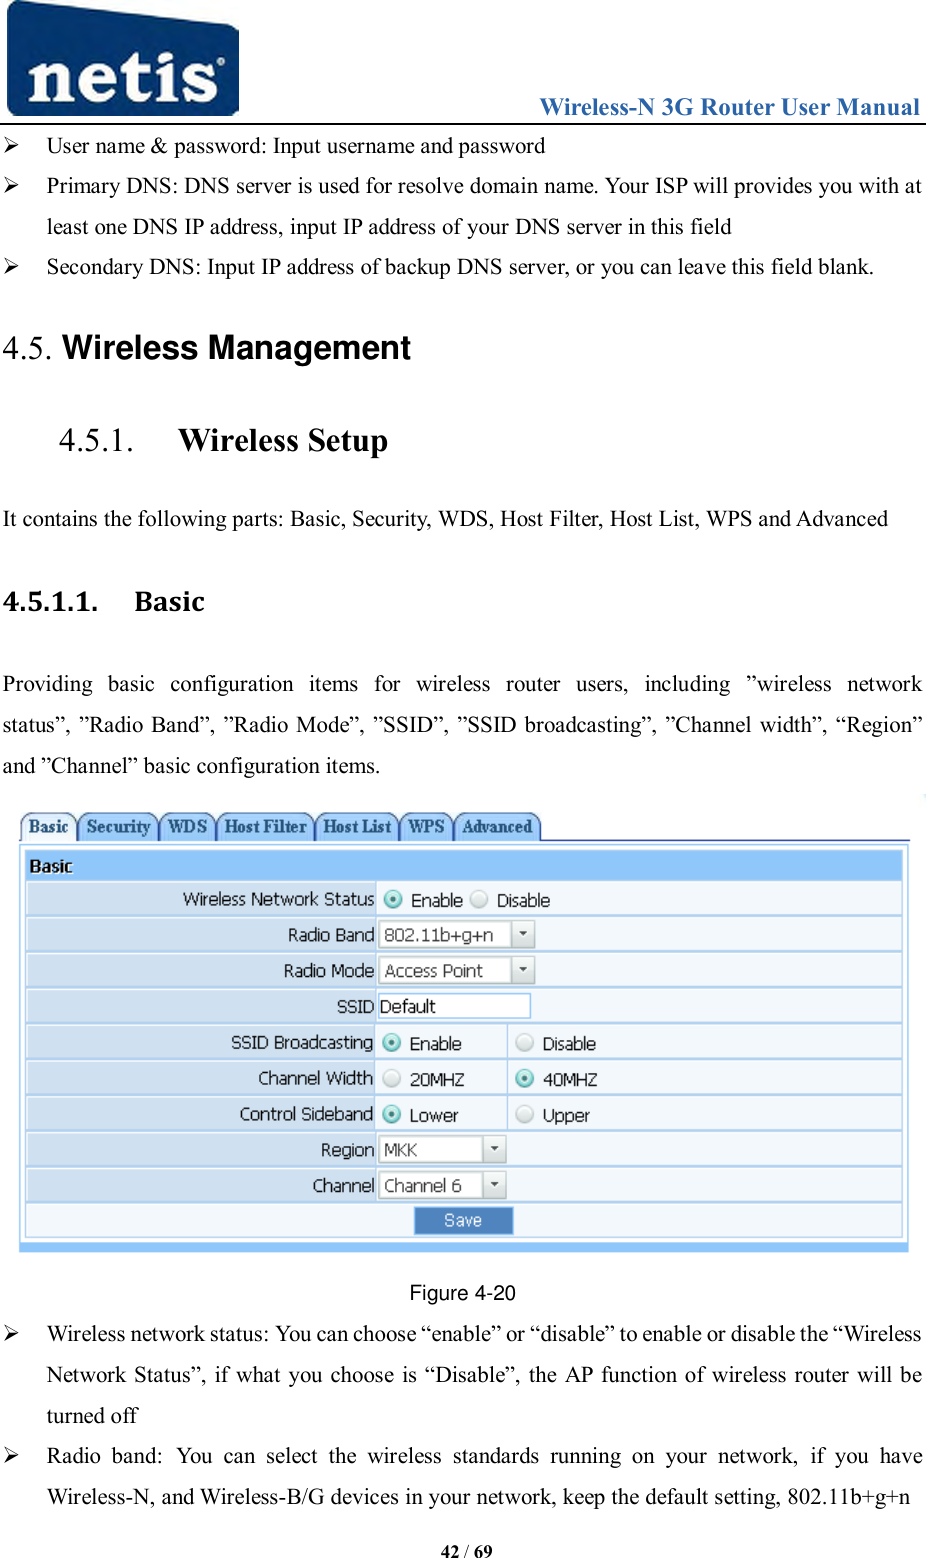                                 Wireless-N 3G Router User Manual  42 / 69  User name &amp; password: Input username and password  Primary DNS: DNS server is used for resolve domain name. Your ISP will provides you with at least one DNS IP address, input IP address of your DNS server in this field  Secondary DNS: Input IP address of backup DNS server, or you can leave this field blank. 4.5. Wireless Management 4.5.1. Wireless Setup It contains the following parts: Basic, Security, WDS, Host Filter, Host List, WPS and Advanced 4.5.1.1. Basic Providing  basic  configuration  items  for  wireless  router  users,  including  ”wireless  network status”, ”Radio Band”, ”Radio Mode”, ”SSID”, ”SSID broadcasting”, ”Channel width”, “Region” and ”Channel” basic configuration items.  Figure 4-20  Wireless network status: You can choose “enable” or “disable” to enable or disable the “Wireless Network Status”, if what you choose is “Disable”, the AP  function of wireless router will be turned off  Radio  band:  You  can  select  the  wireless  standards  running  on  your  network,  if  you  have Wireless-N, and Wireless-B/G devices in your network, keep the default setting, 802.11b+g+n 